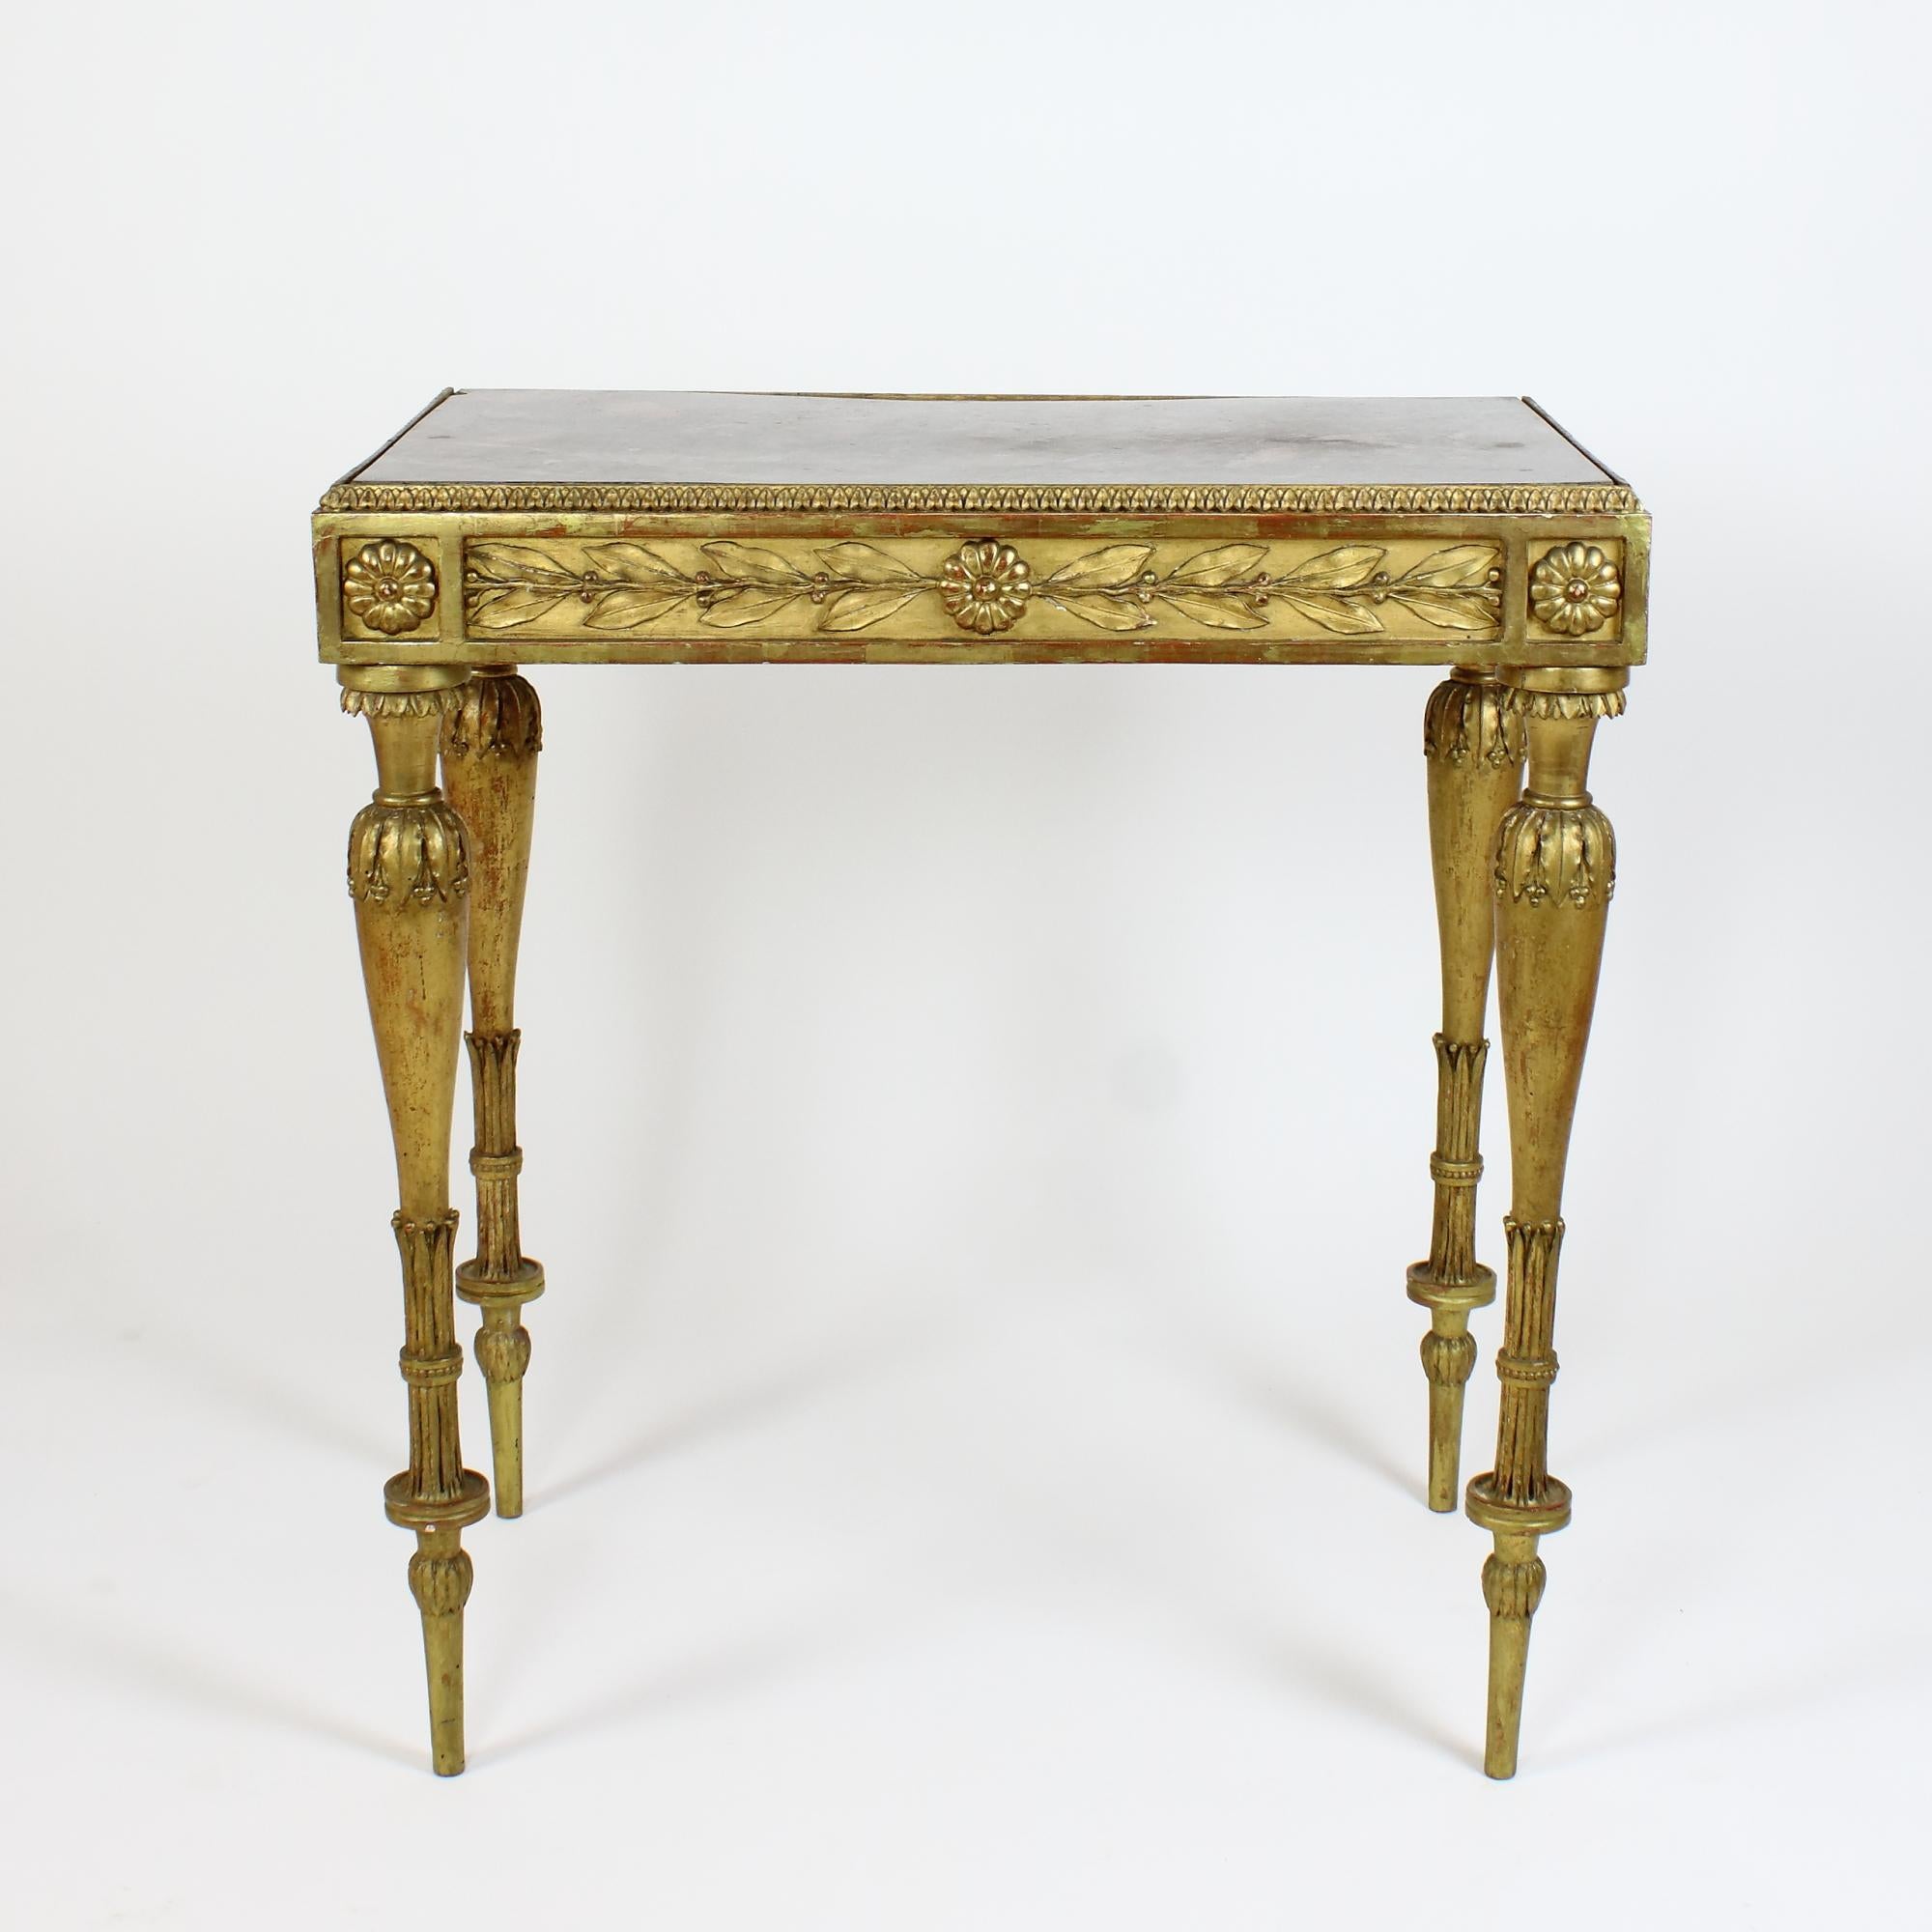 French 19th Century Napoleon III / Louis XVI Style Giltwood Center Table

A rectangular table made of gilded wood is resting on four slender richly sculpted spindle shaped legs with lanceolate leaf decration. The front and both sides decorated with